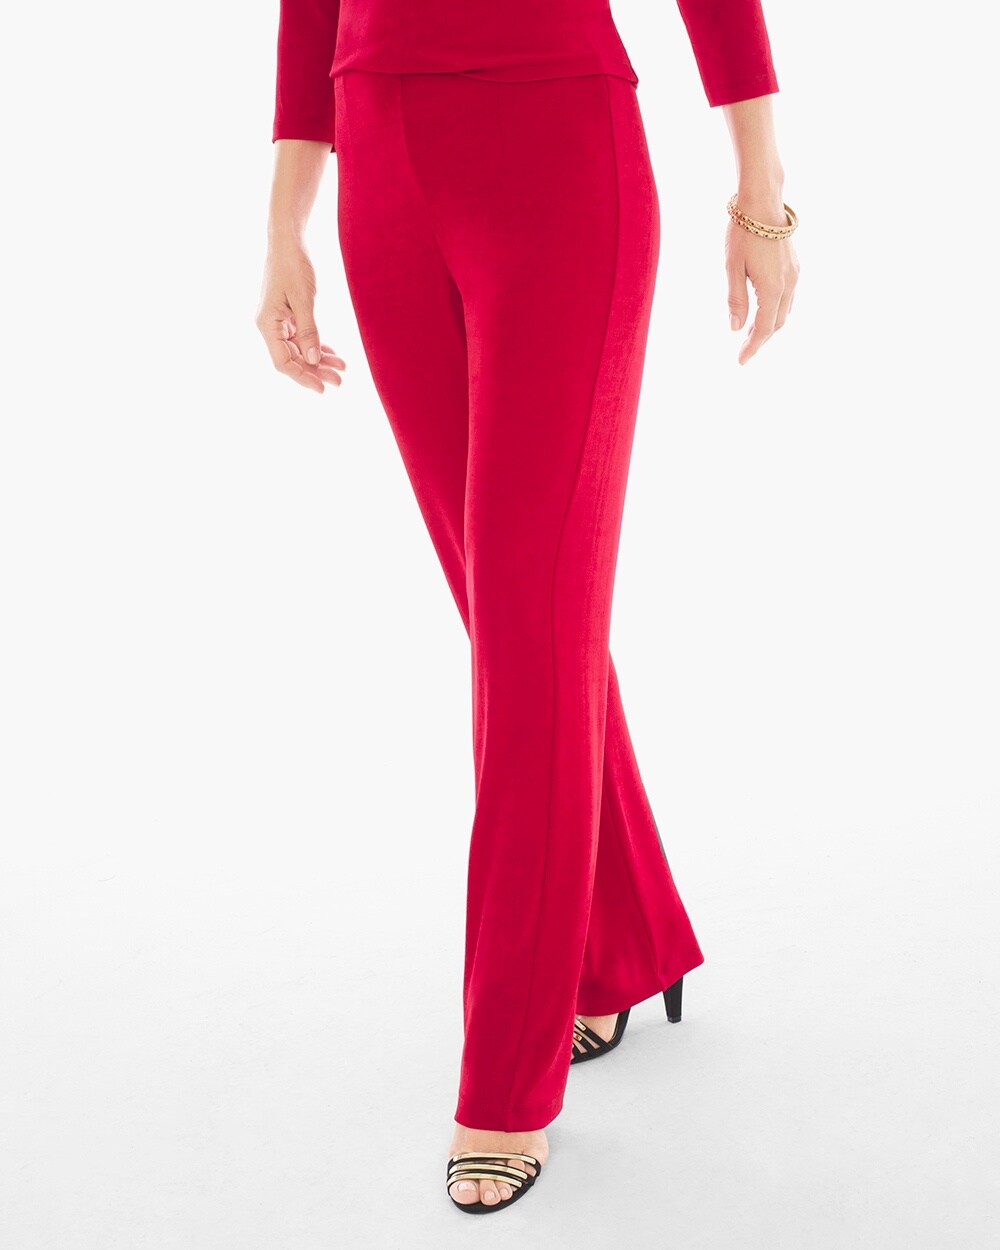 Travelers Classic No Tummy Pants in Sultry Red